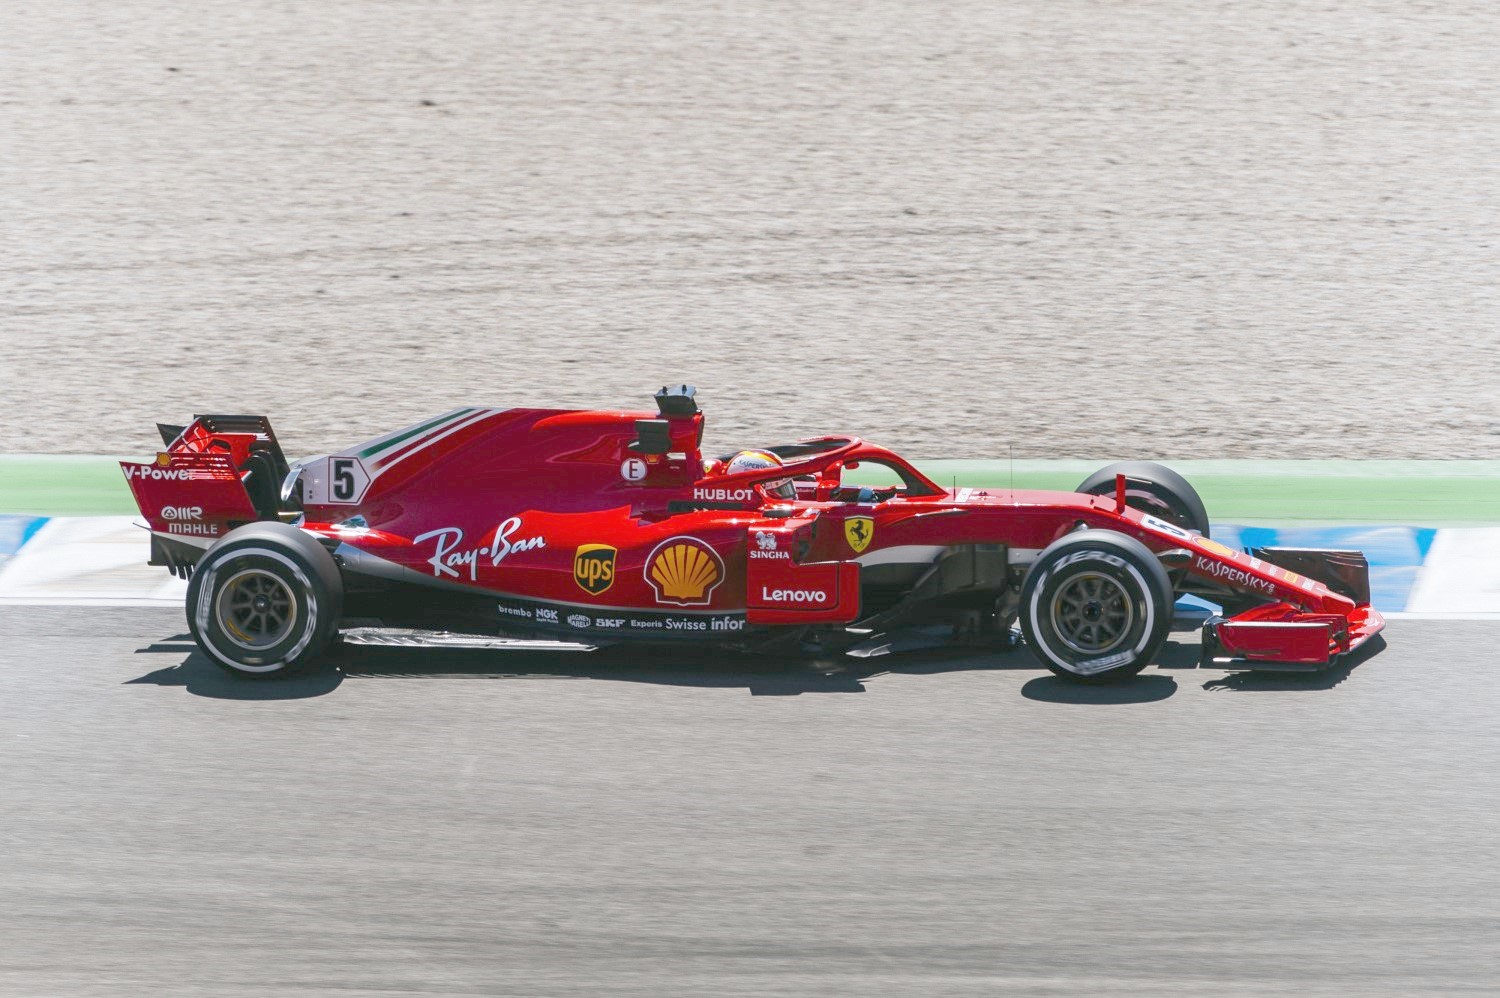 How this will affect the Ferrari F1 team remains to be seen